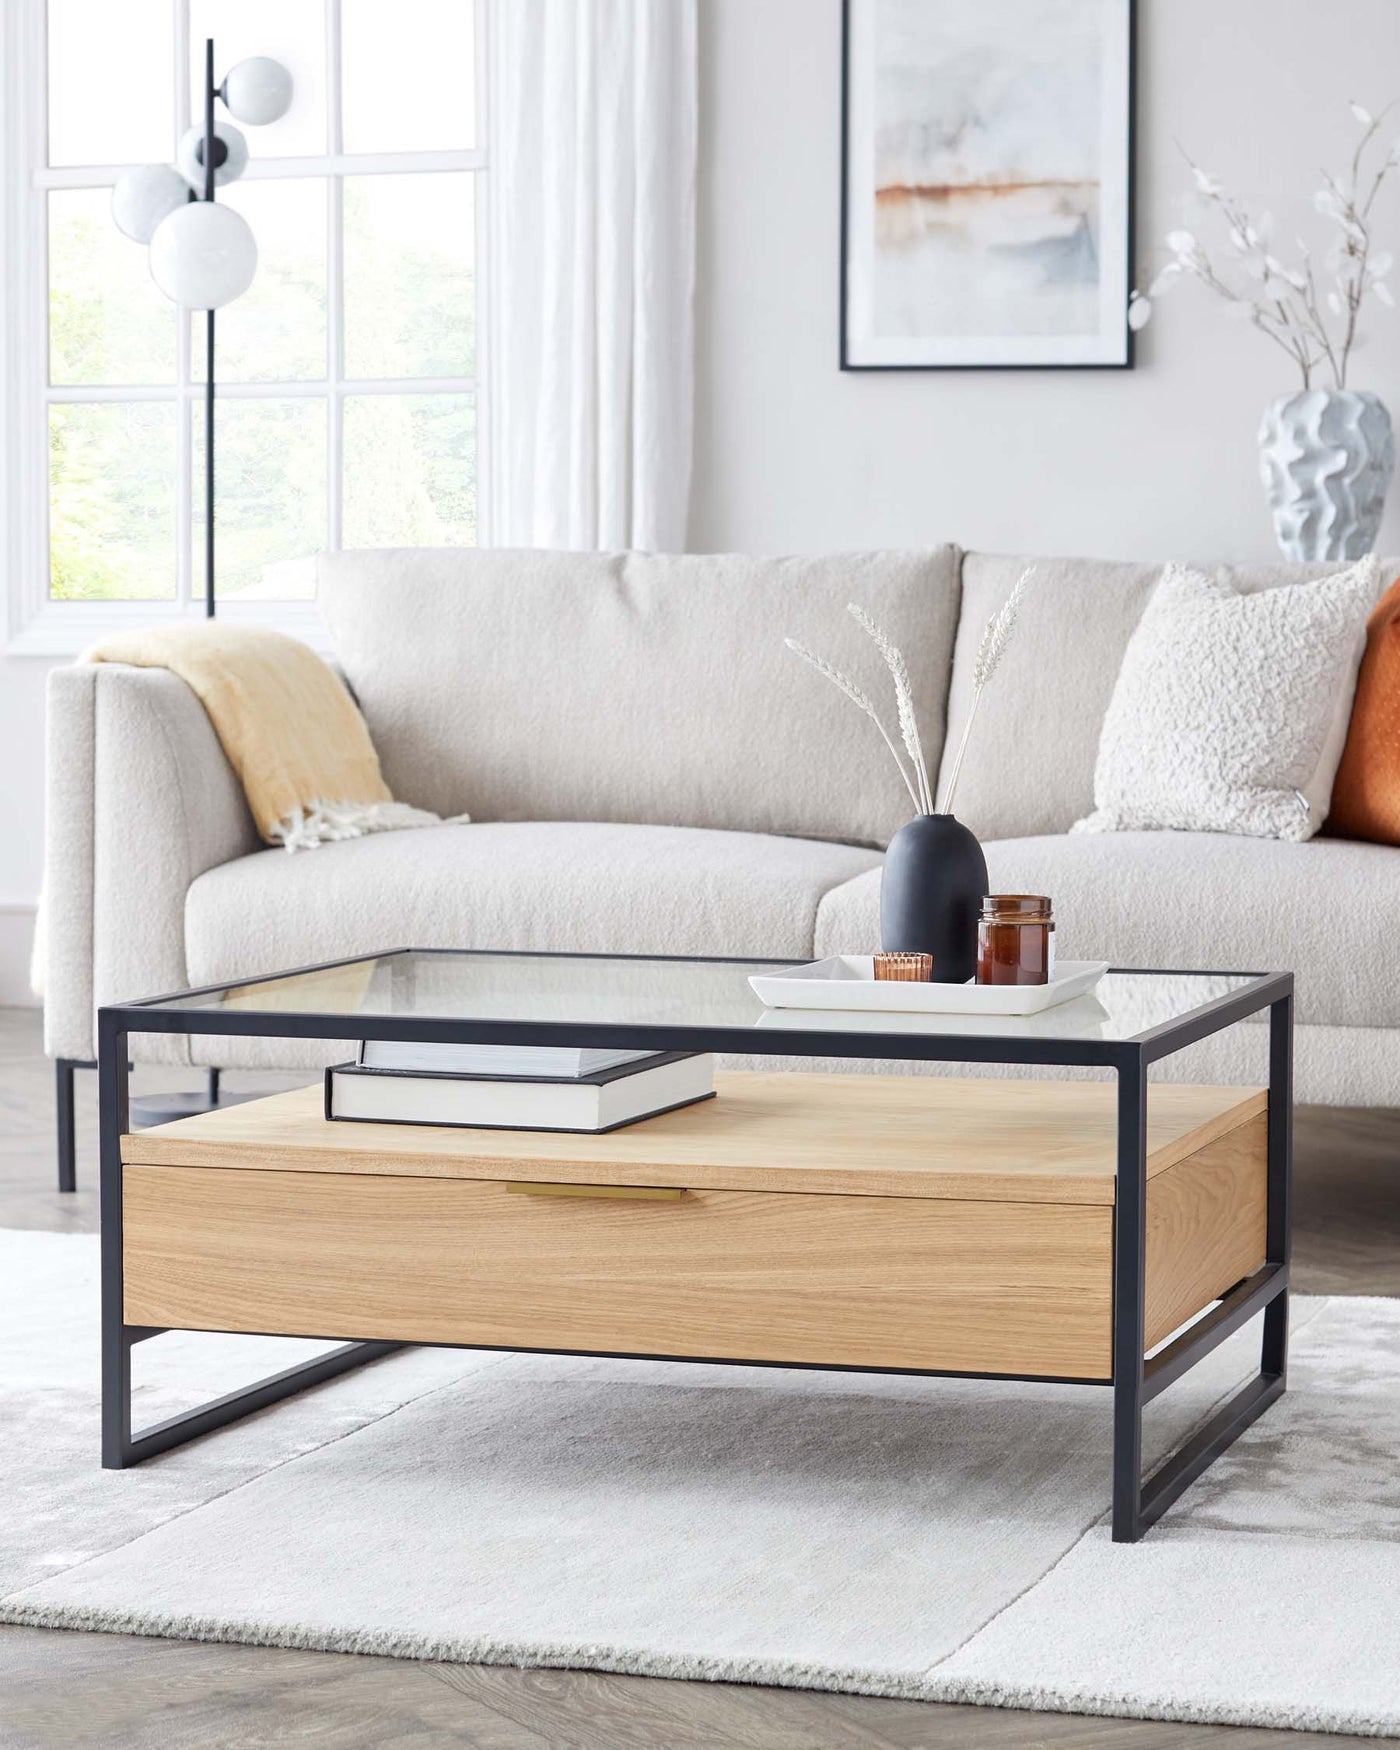 Contemporary rectangular coffee table featuring a black metal frame with a clear glass top and a lower wooden shelf with a natural oak finish. The table is styled with books and decorative items on both tiers.